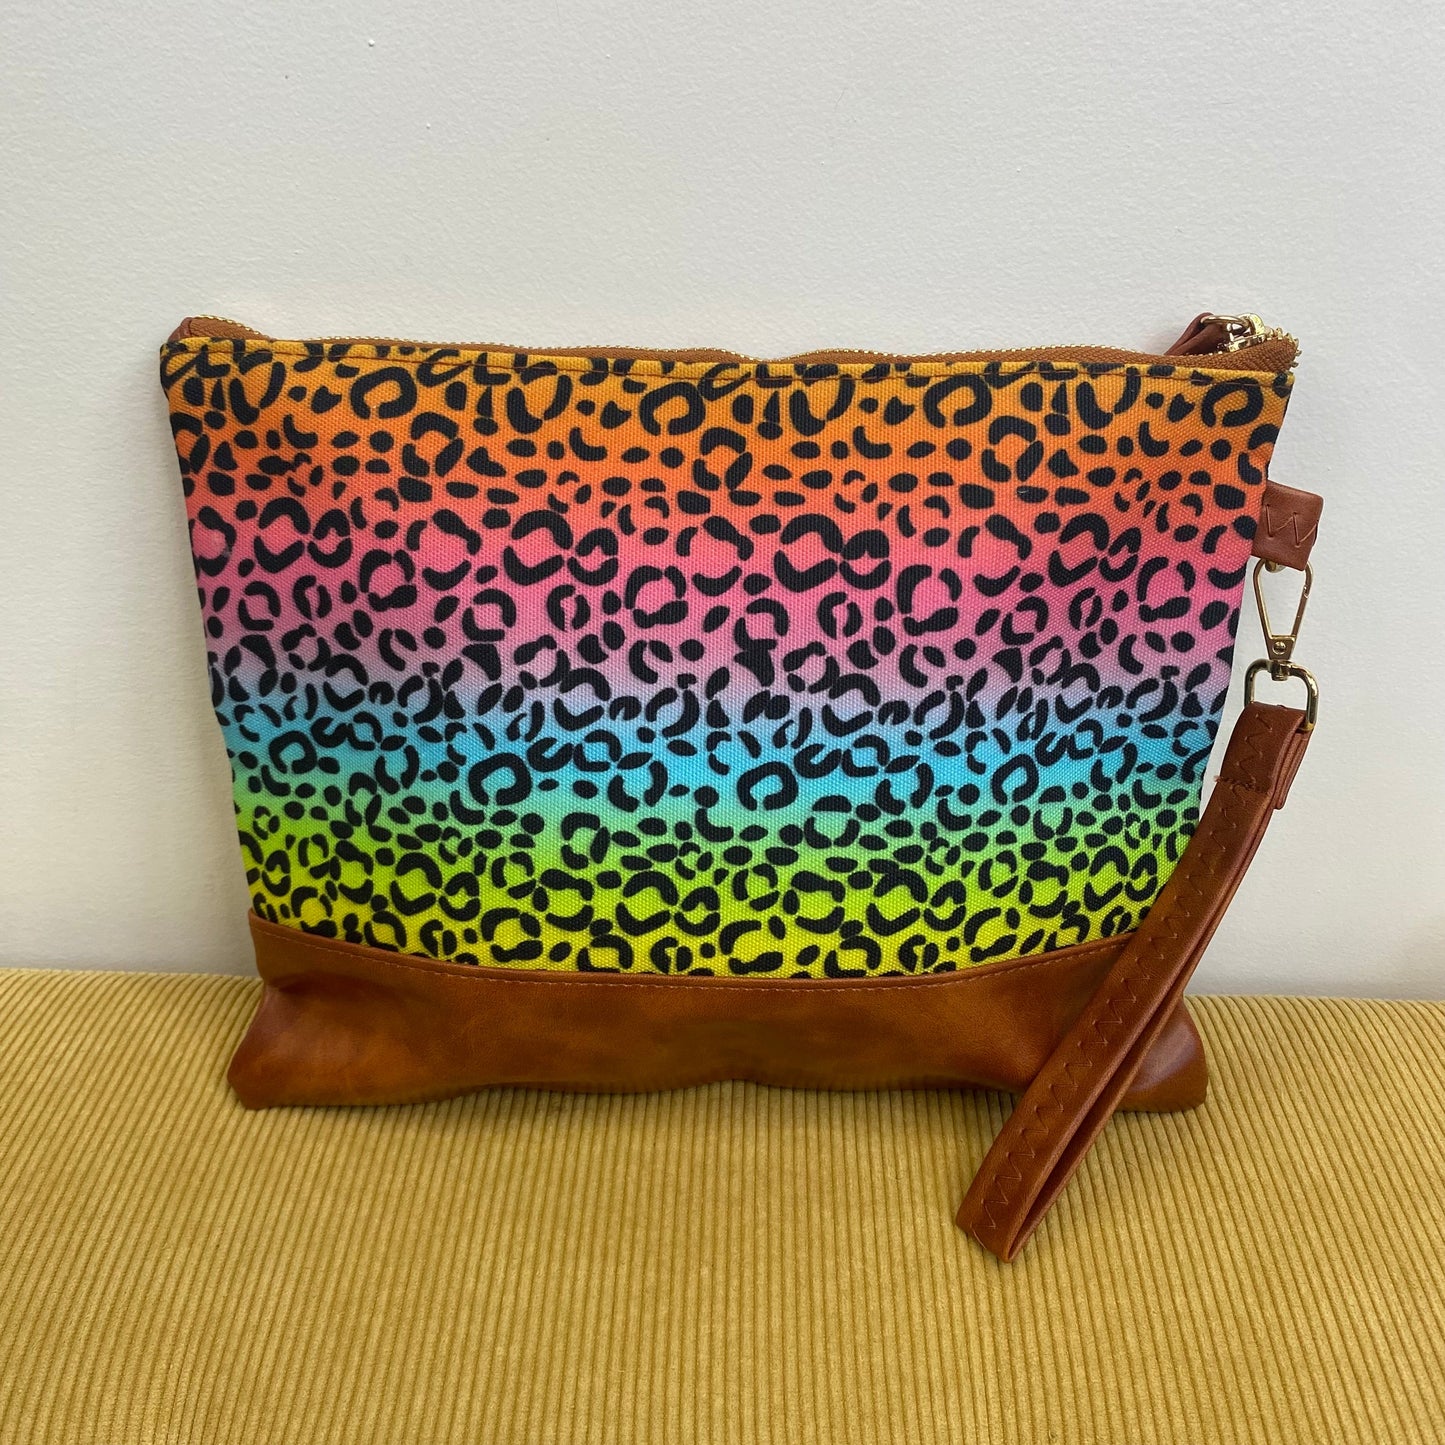 Clutch - Oversized Canvas & Faux Leather - Pink Blue White Leopard